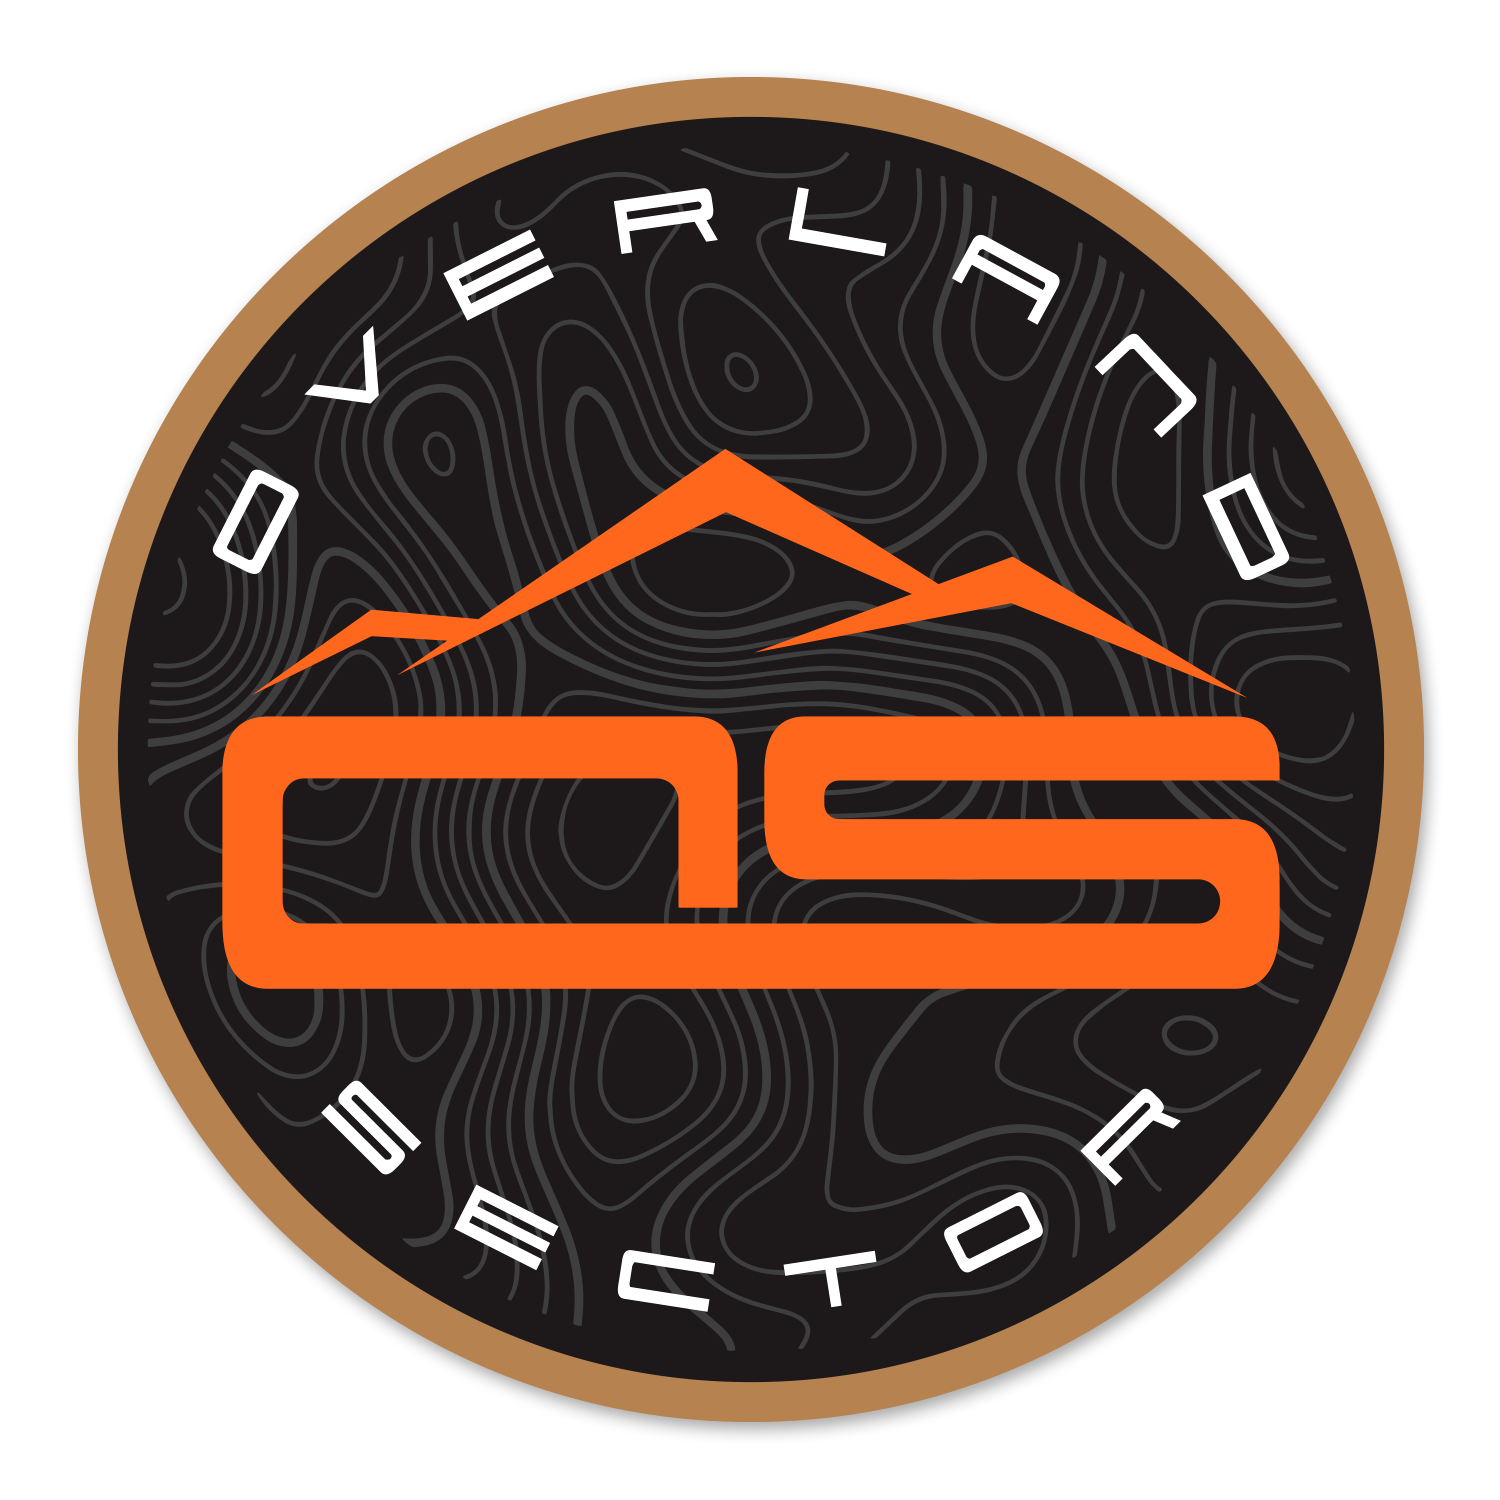 Overland Sector Wheels Official Brand Sticker peel and stick